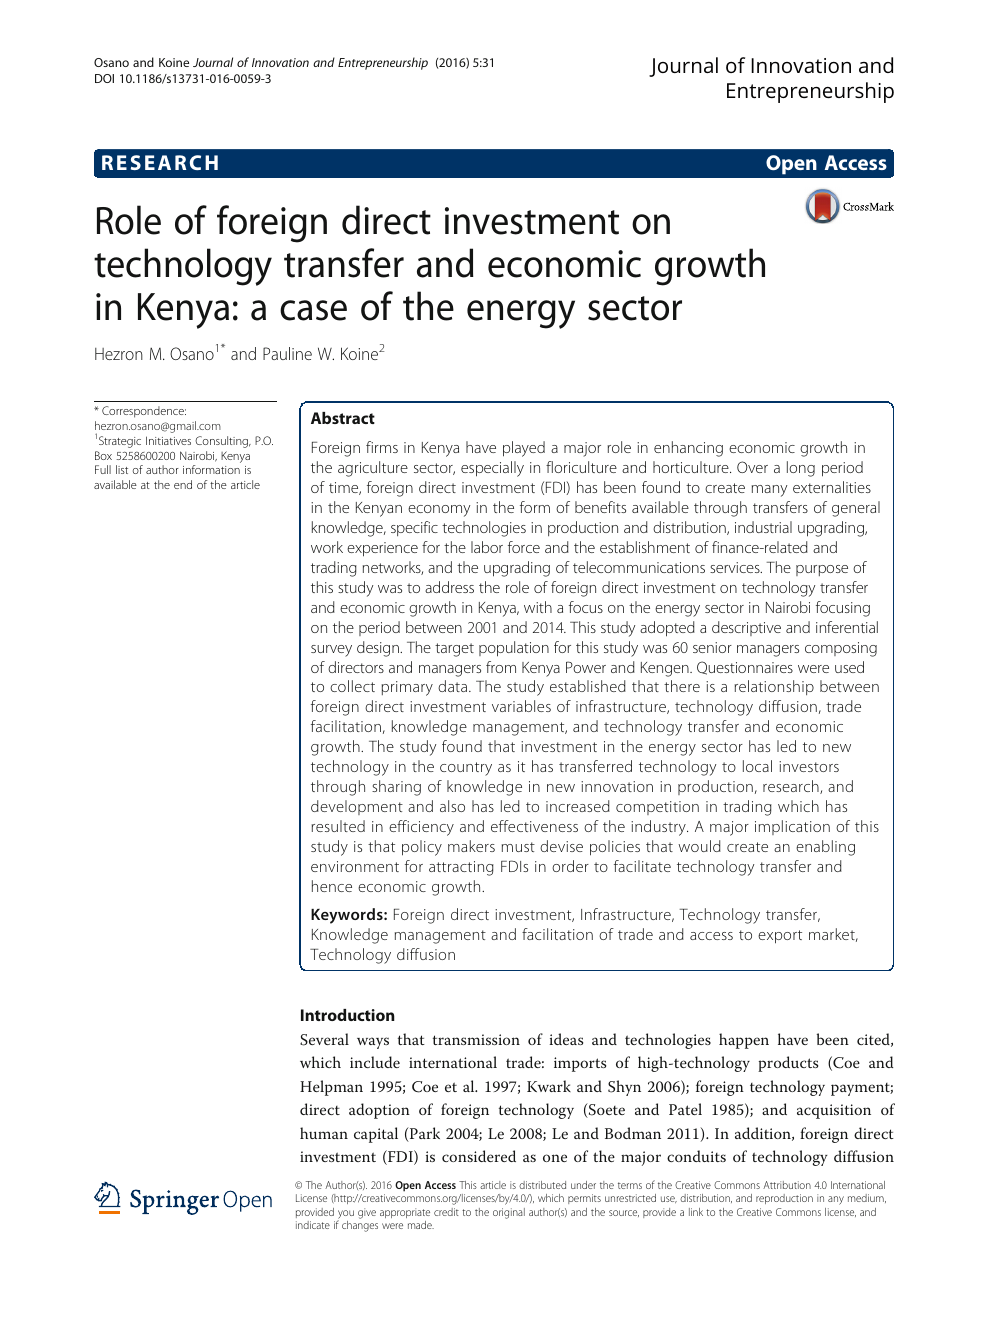 difference between foreign direct investment and international trade